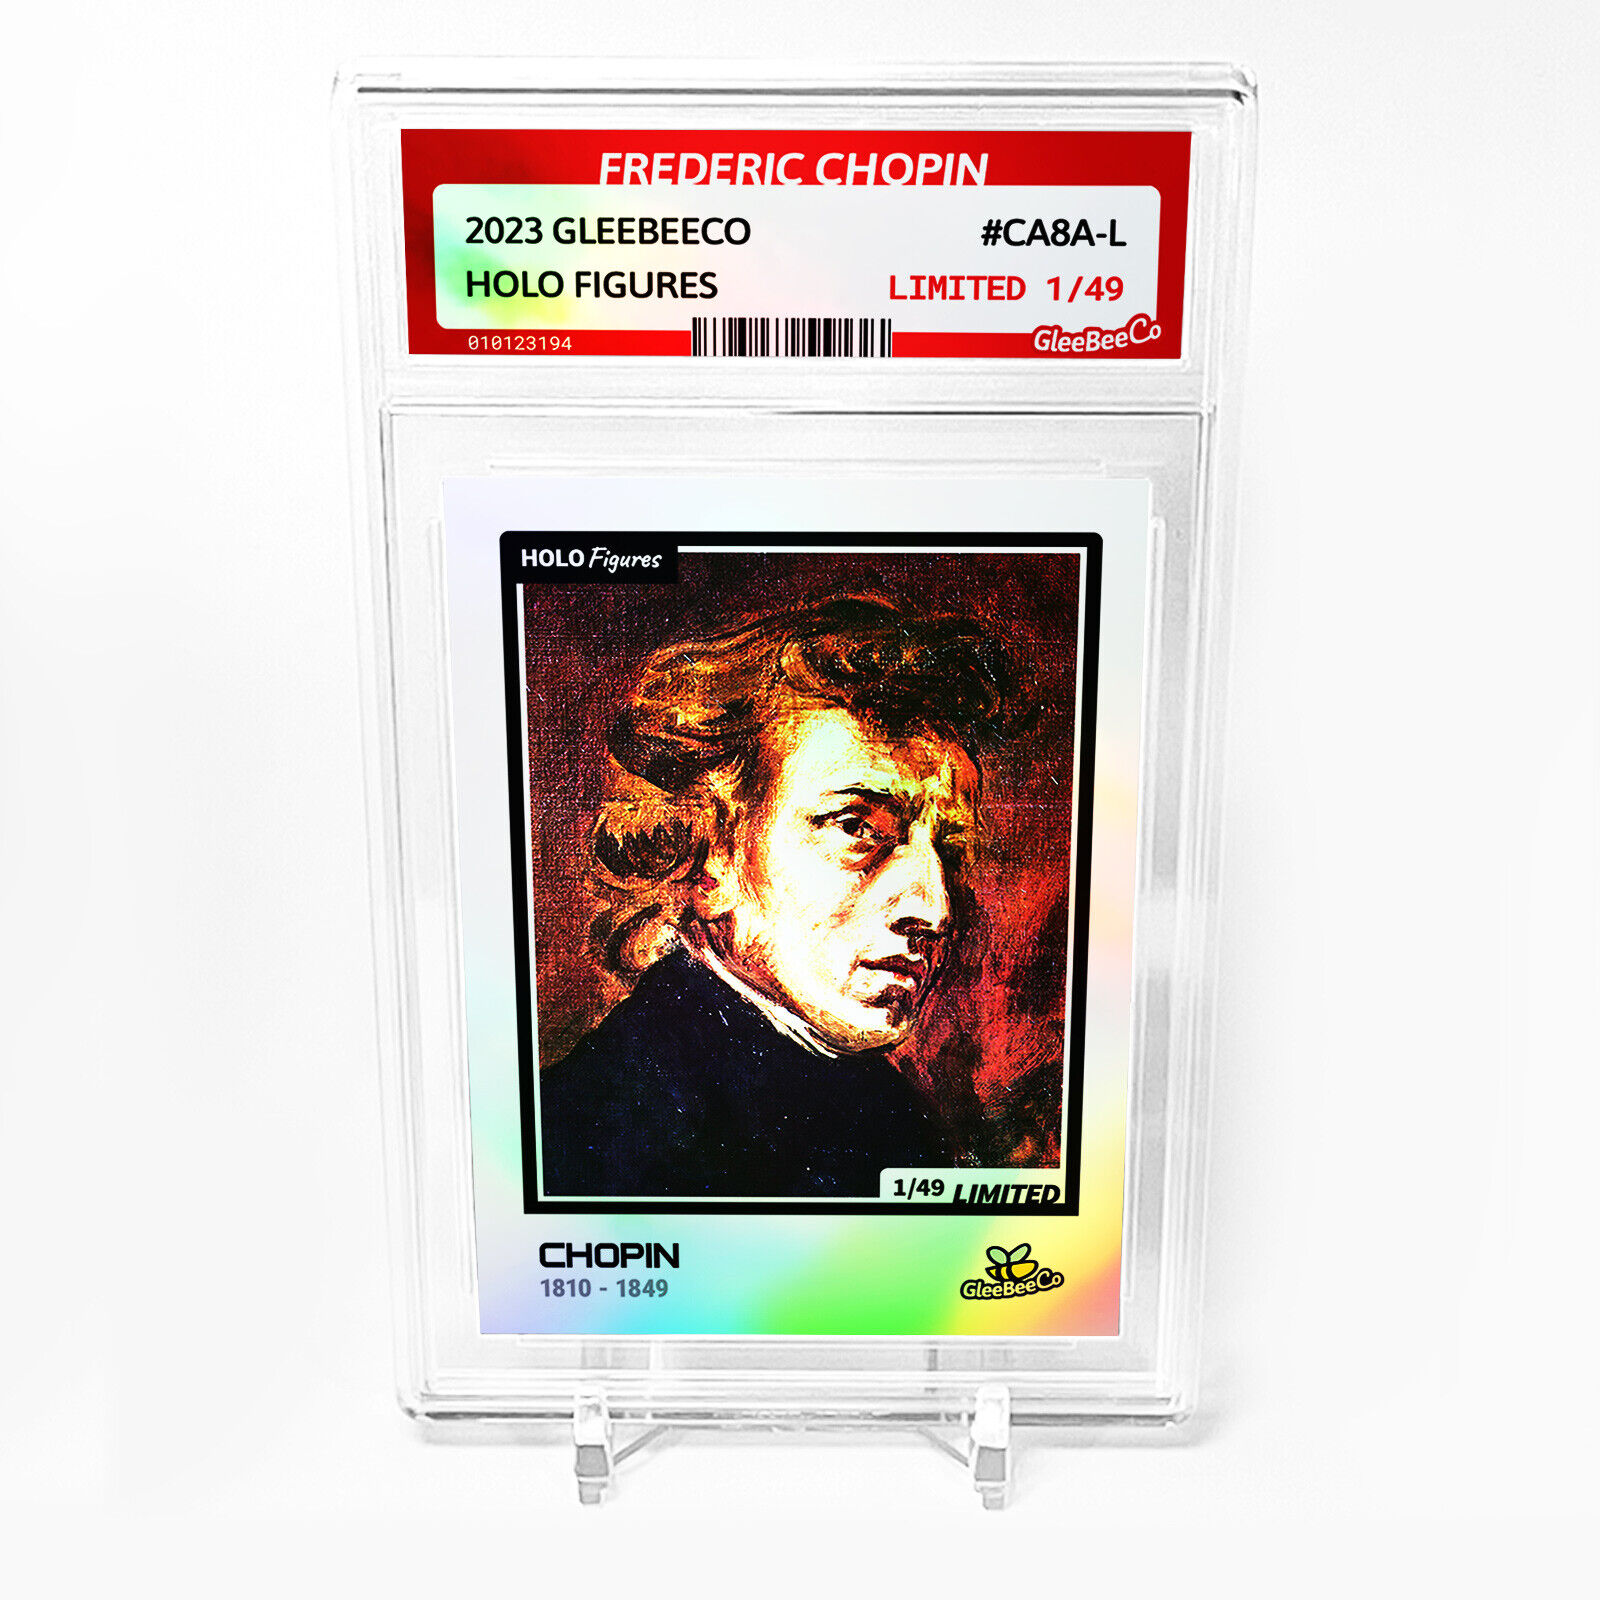 CHOPIN 1810 - 1849 Frederic Chopin 2023 GleeBeeCo Card Holographic #CA8A-L /49